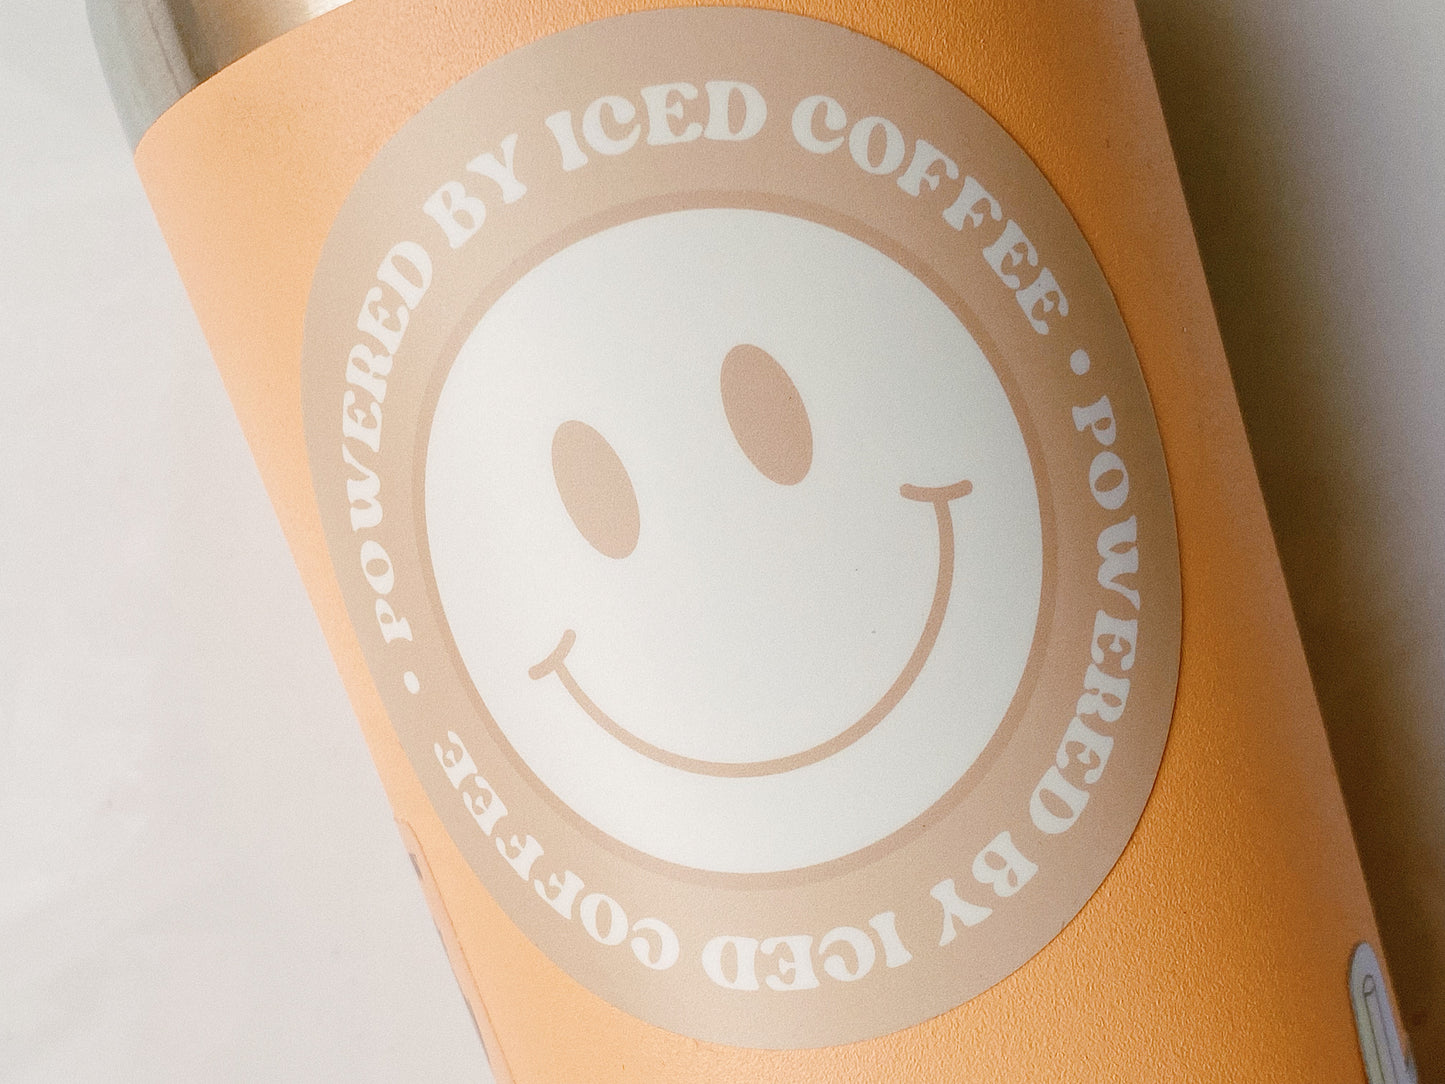 Powered By Iced Coffee Sticker